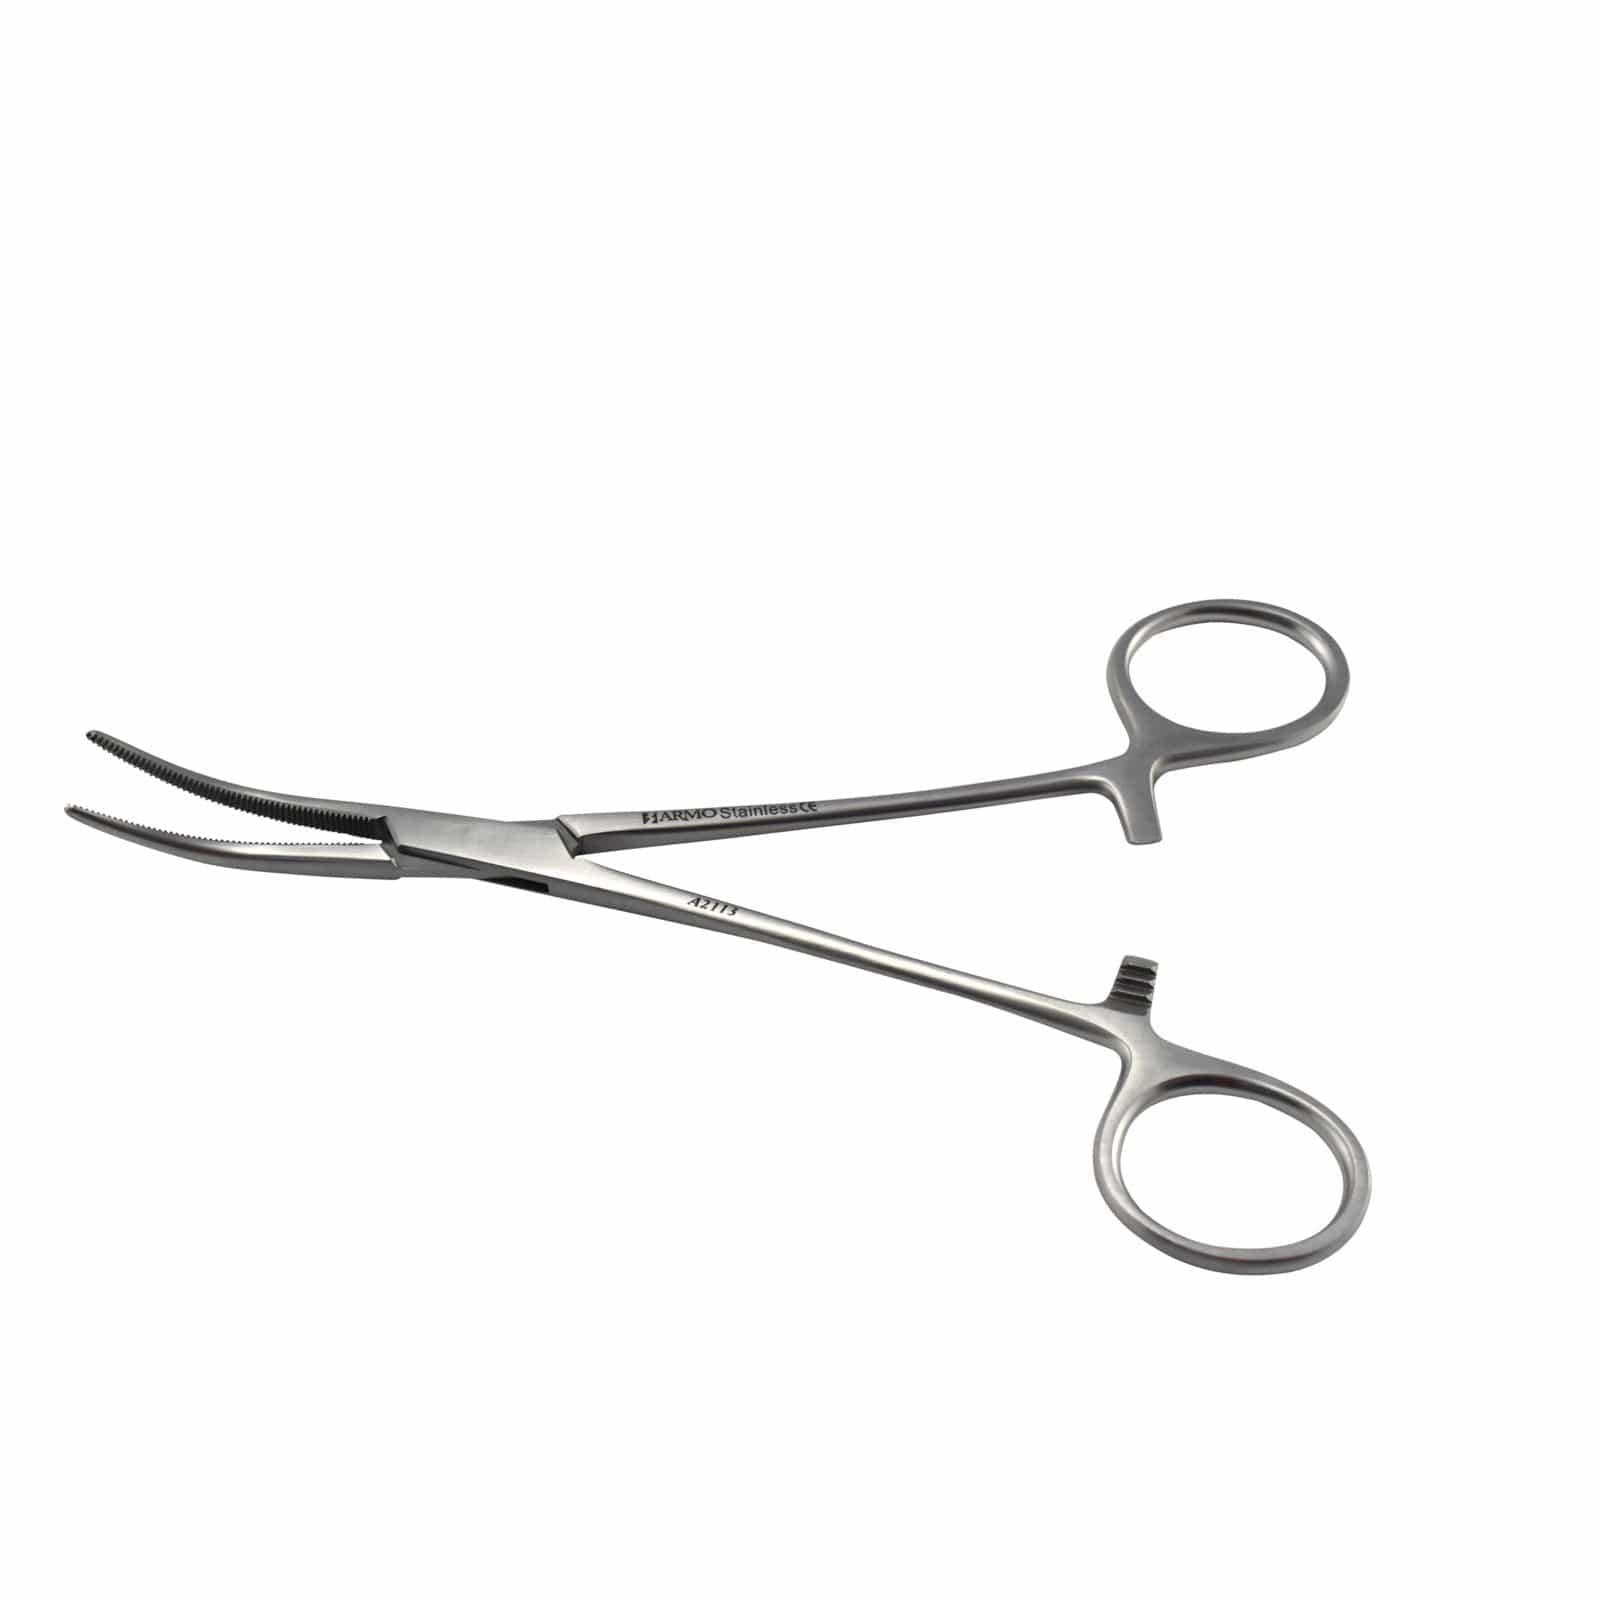 Armo Surgical Instruments 16cm / Curved Armo Crile Artery Forceps